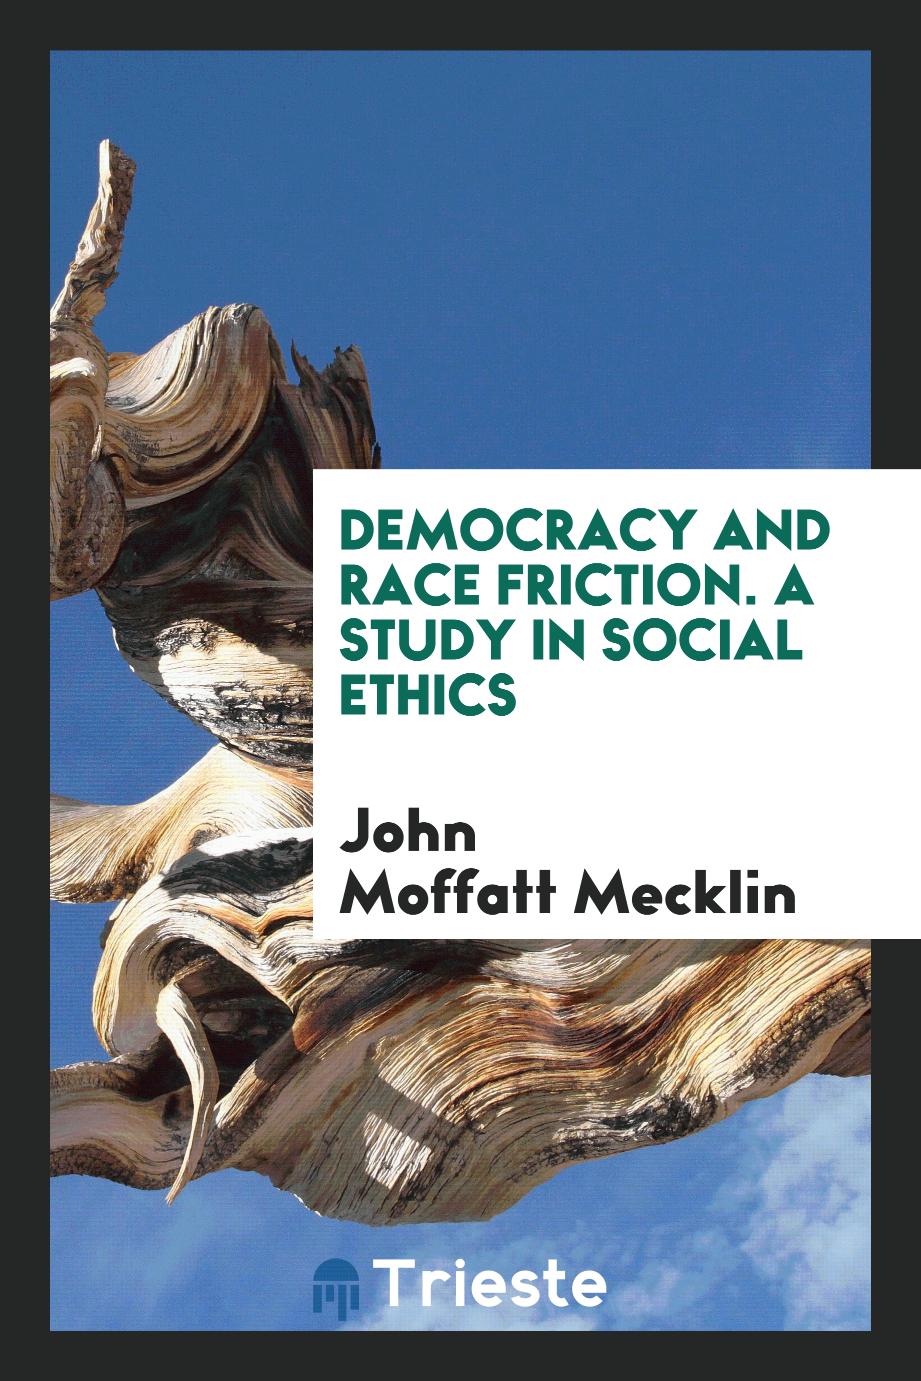 Democracy and race friction. A study in social ethics